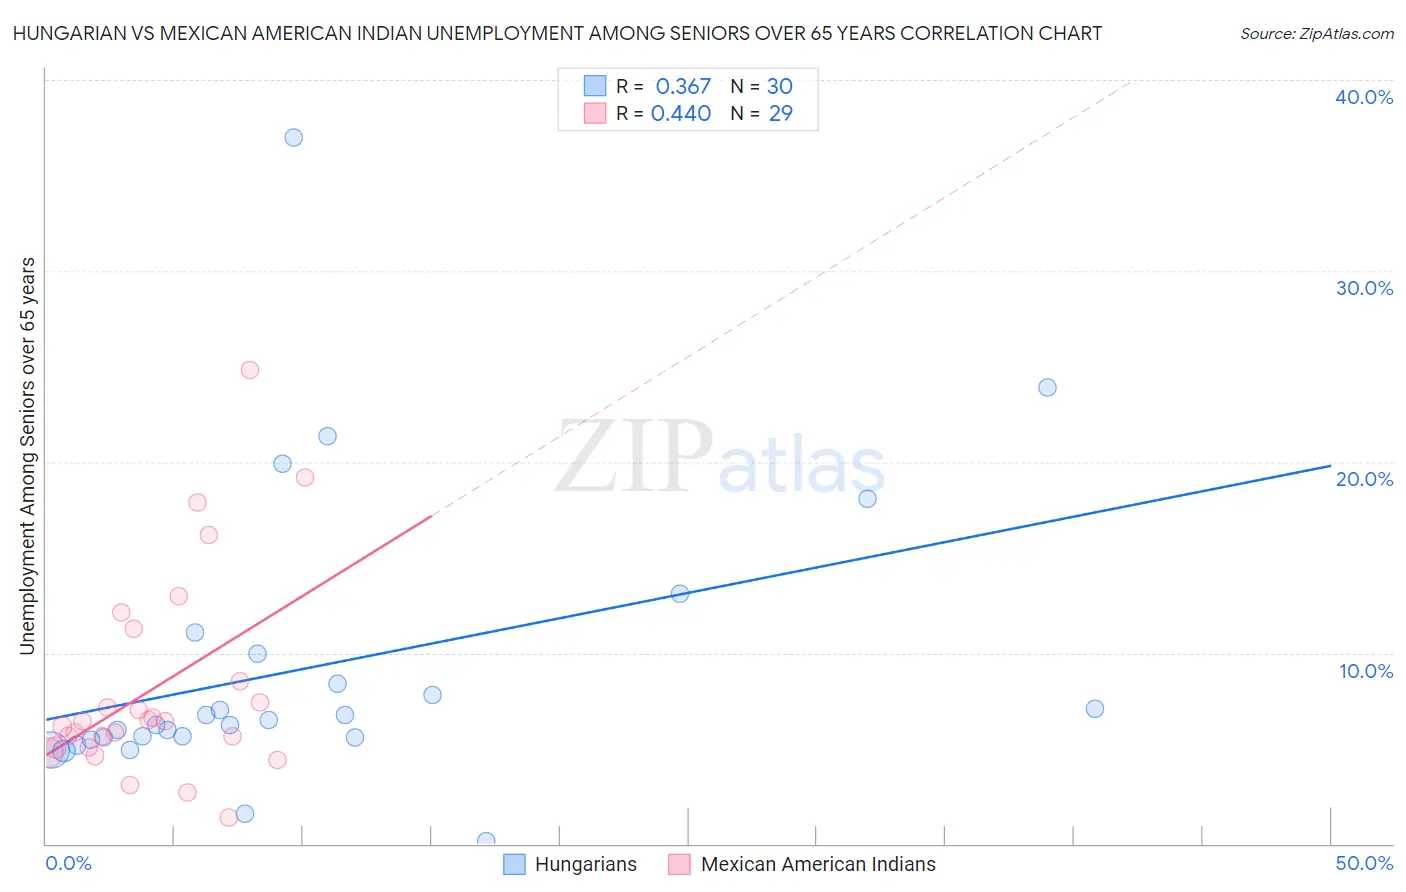 Hungarian vs Mexican American Indian Unemployment Among Seniors over 65 years